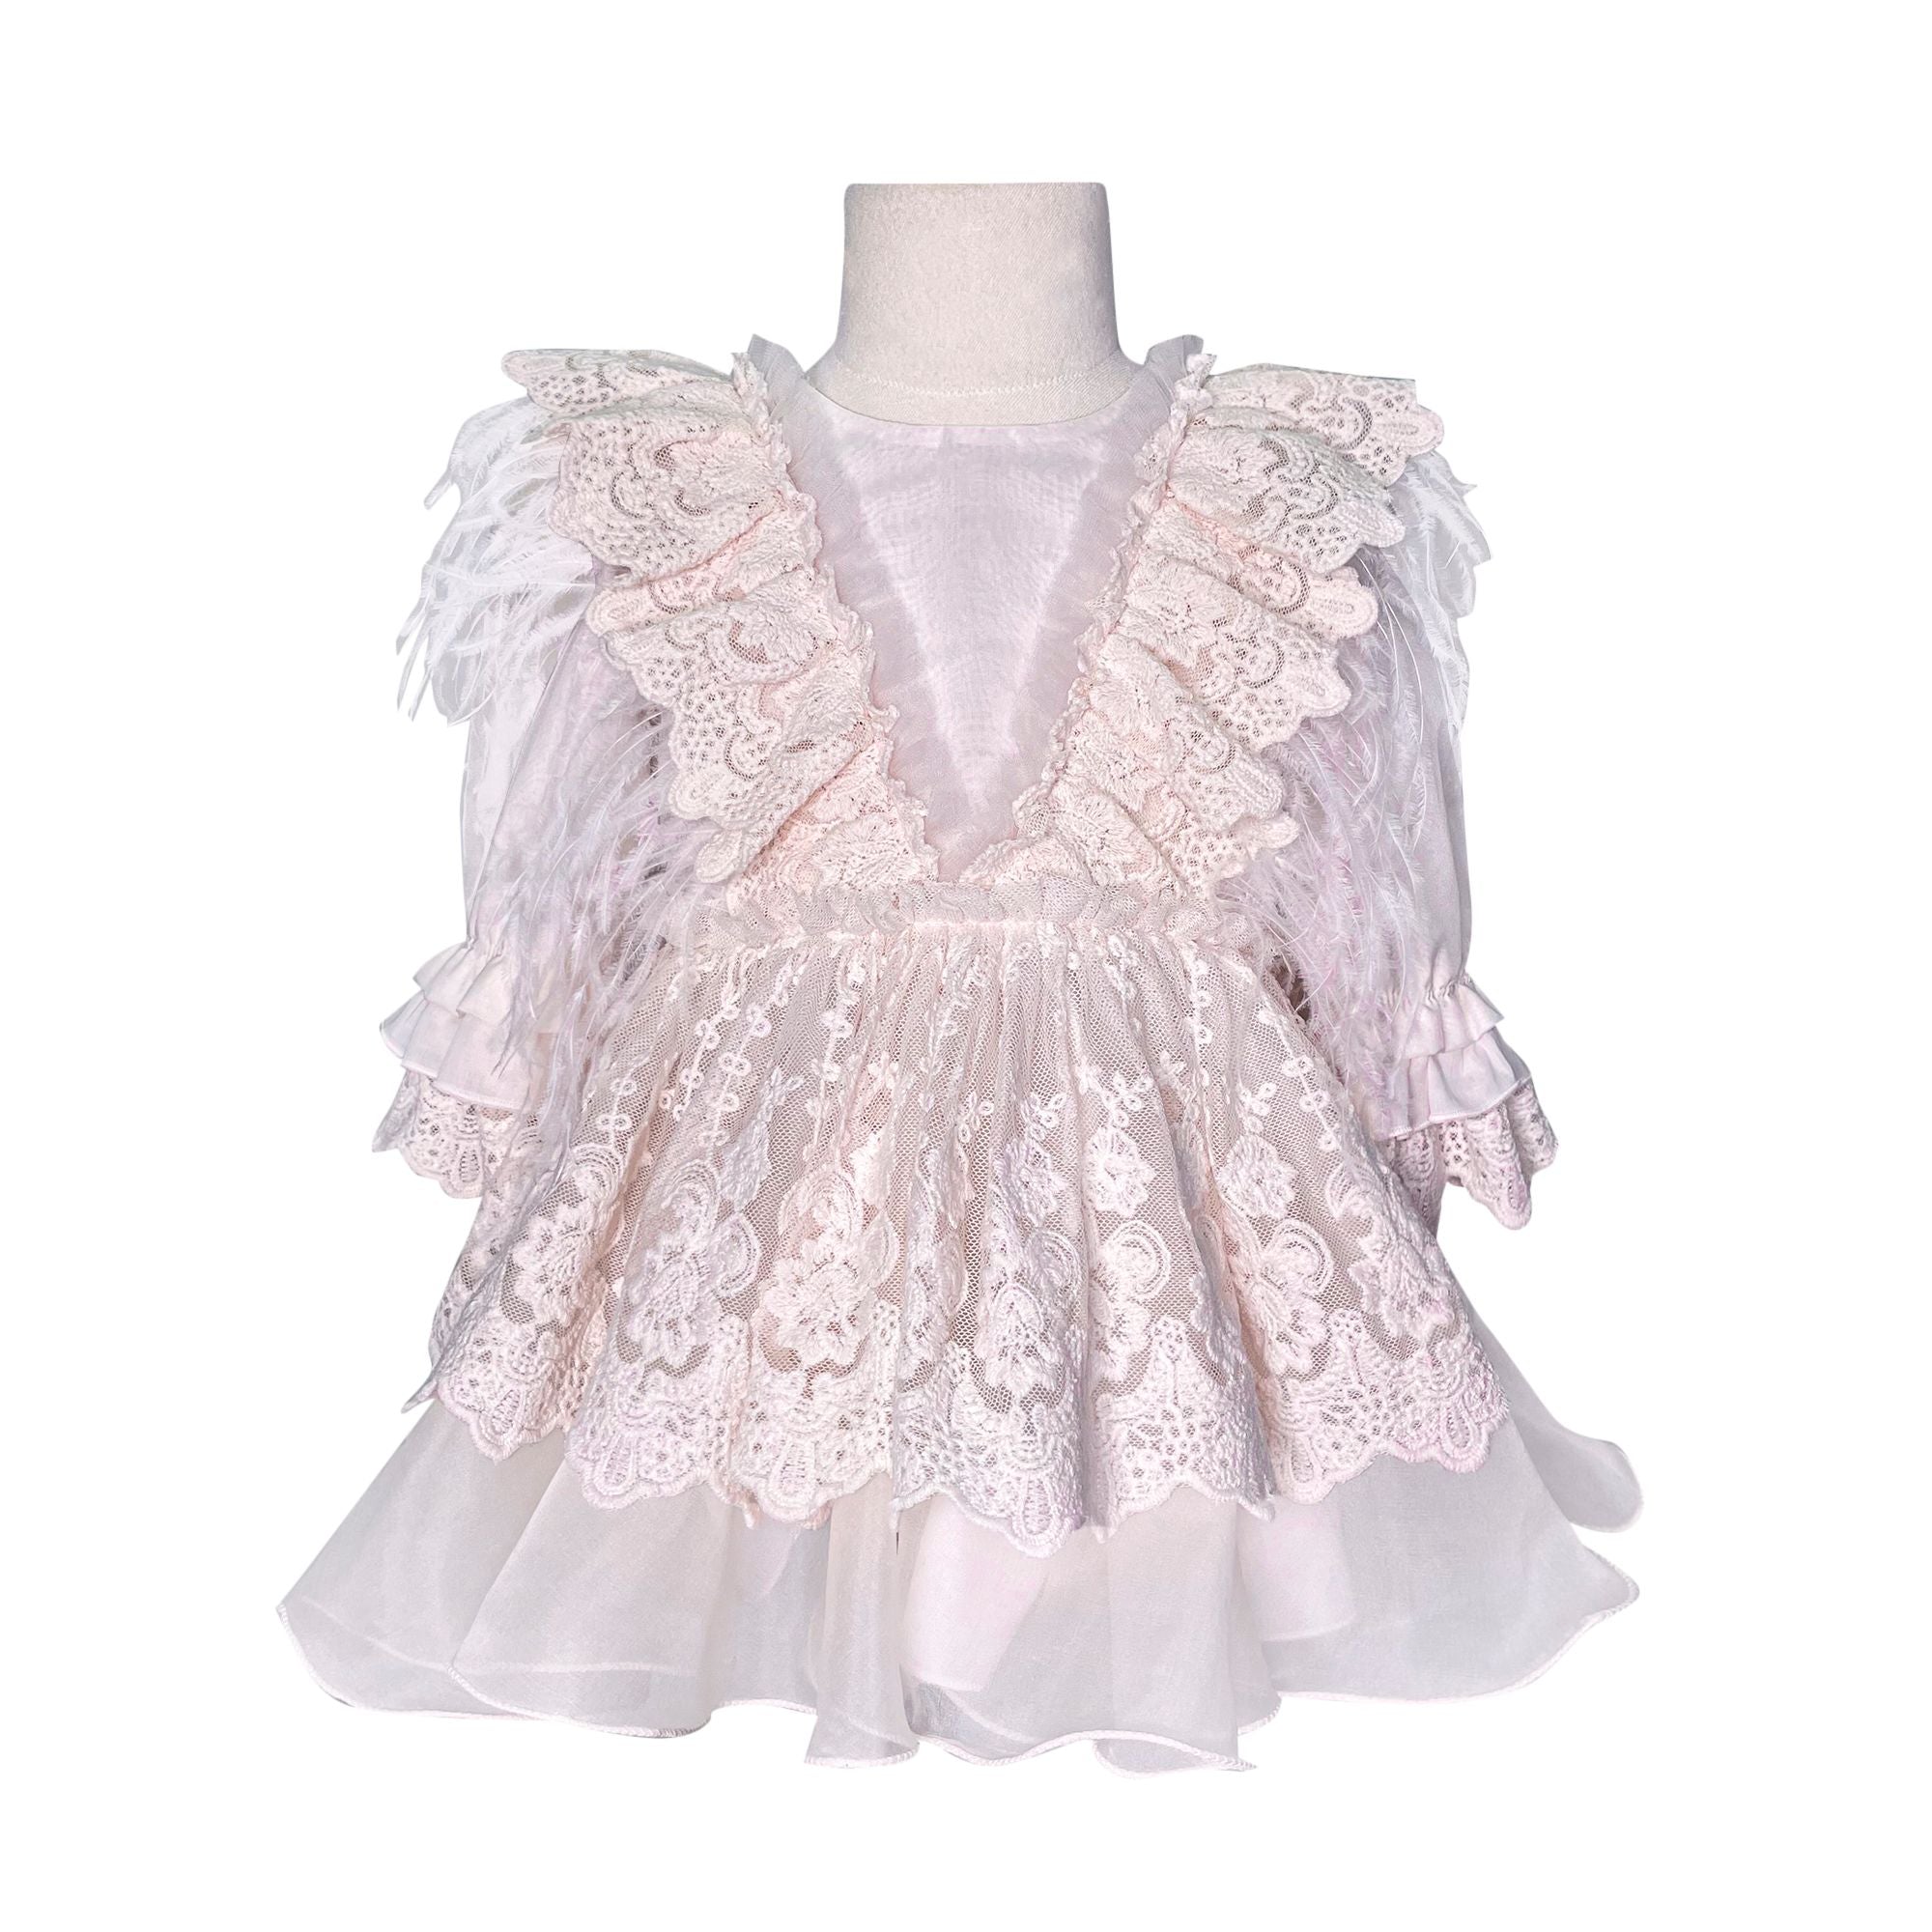 Sleeved Feather Fairy Dress (Pink)